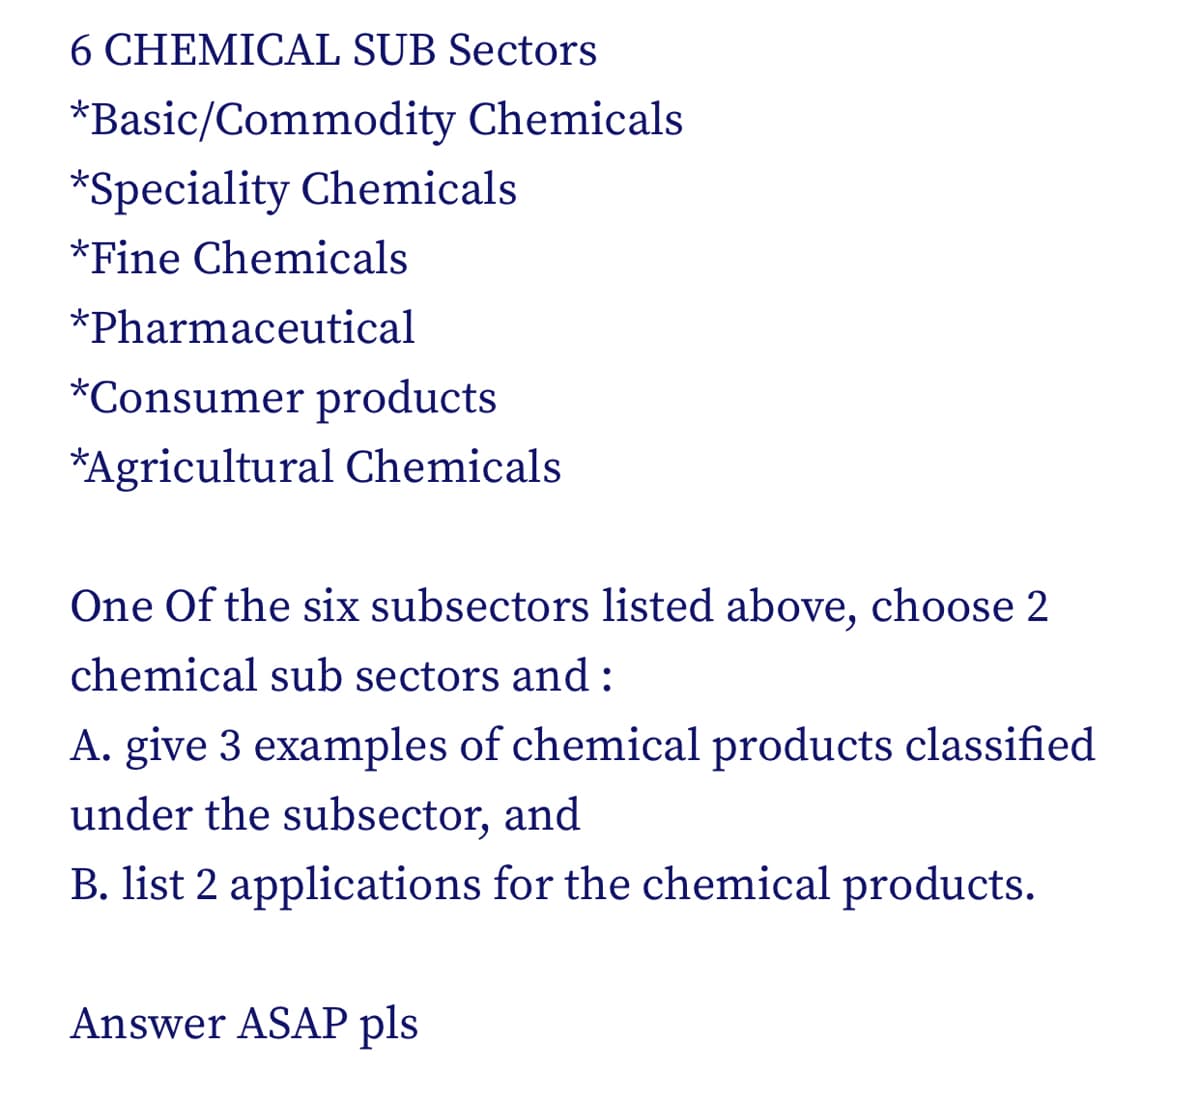 6 CHEMICAL SUB Sectors
*Basic/Commodity Chemicals
*Speciality Chemicals
*Fine Chemicals
*Pharmaceutical
*Consumer products
*Agricultural Chemicals
One Of the six subsectors listed above, choose 2
chemical sub sectors and:
A. give 3 examples of chemical products classified
under the subsector, and
B. list 2 applications for the chemical products.
Answer ASAP pls
